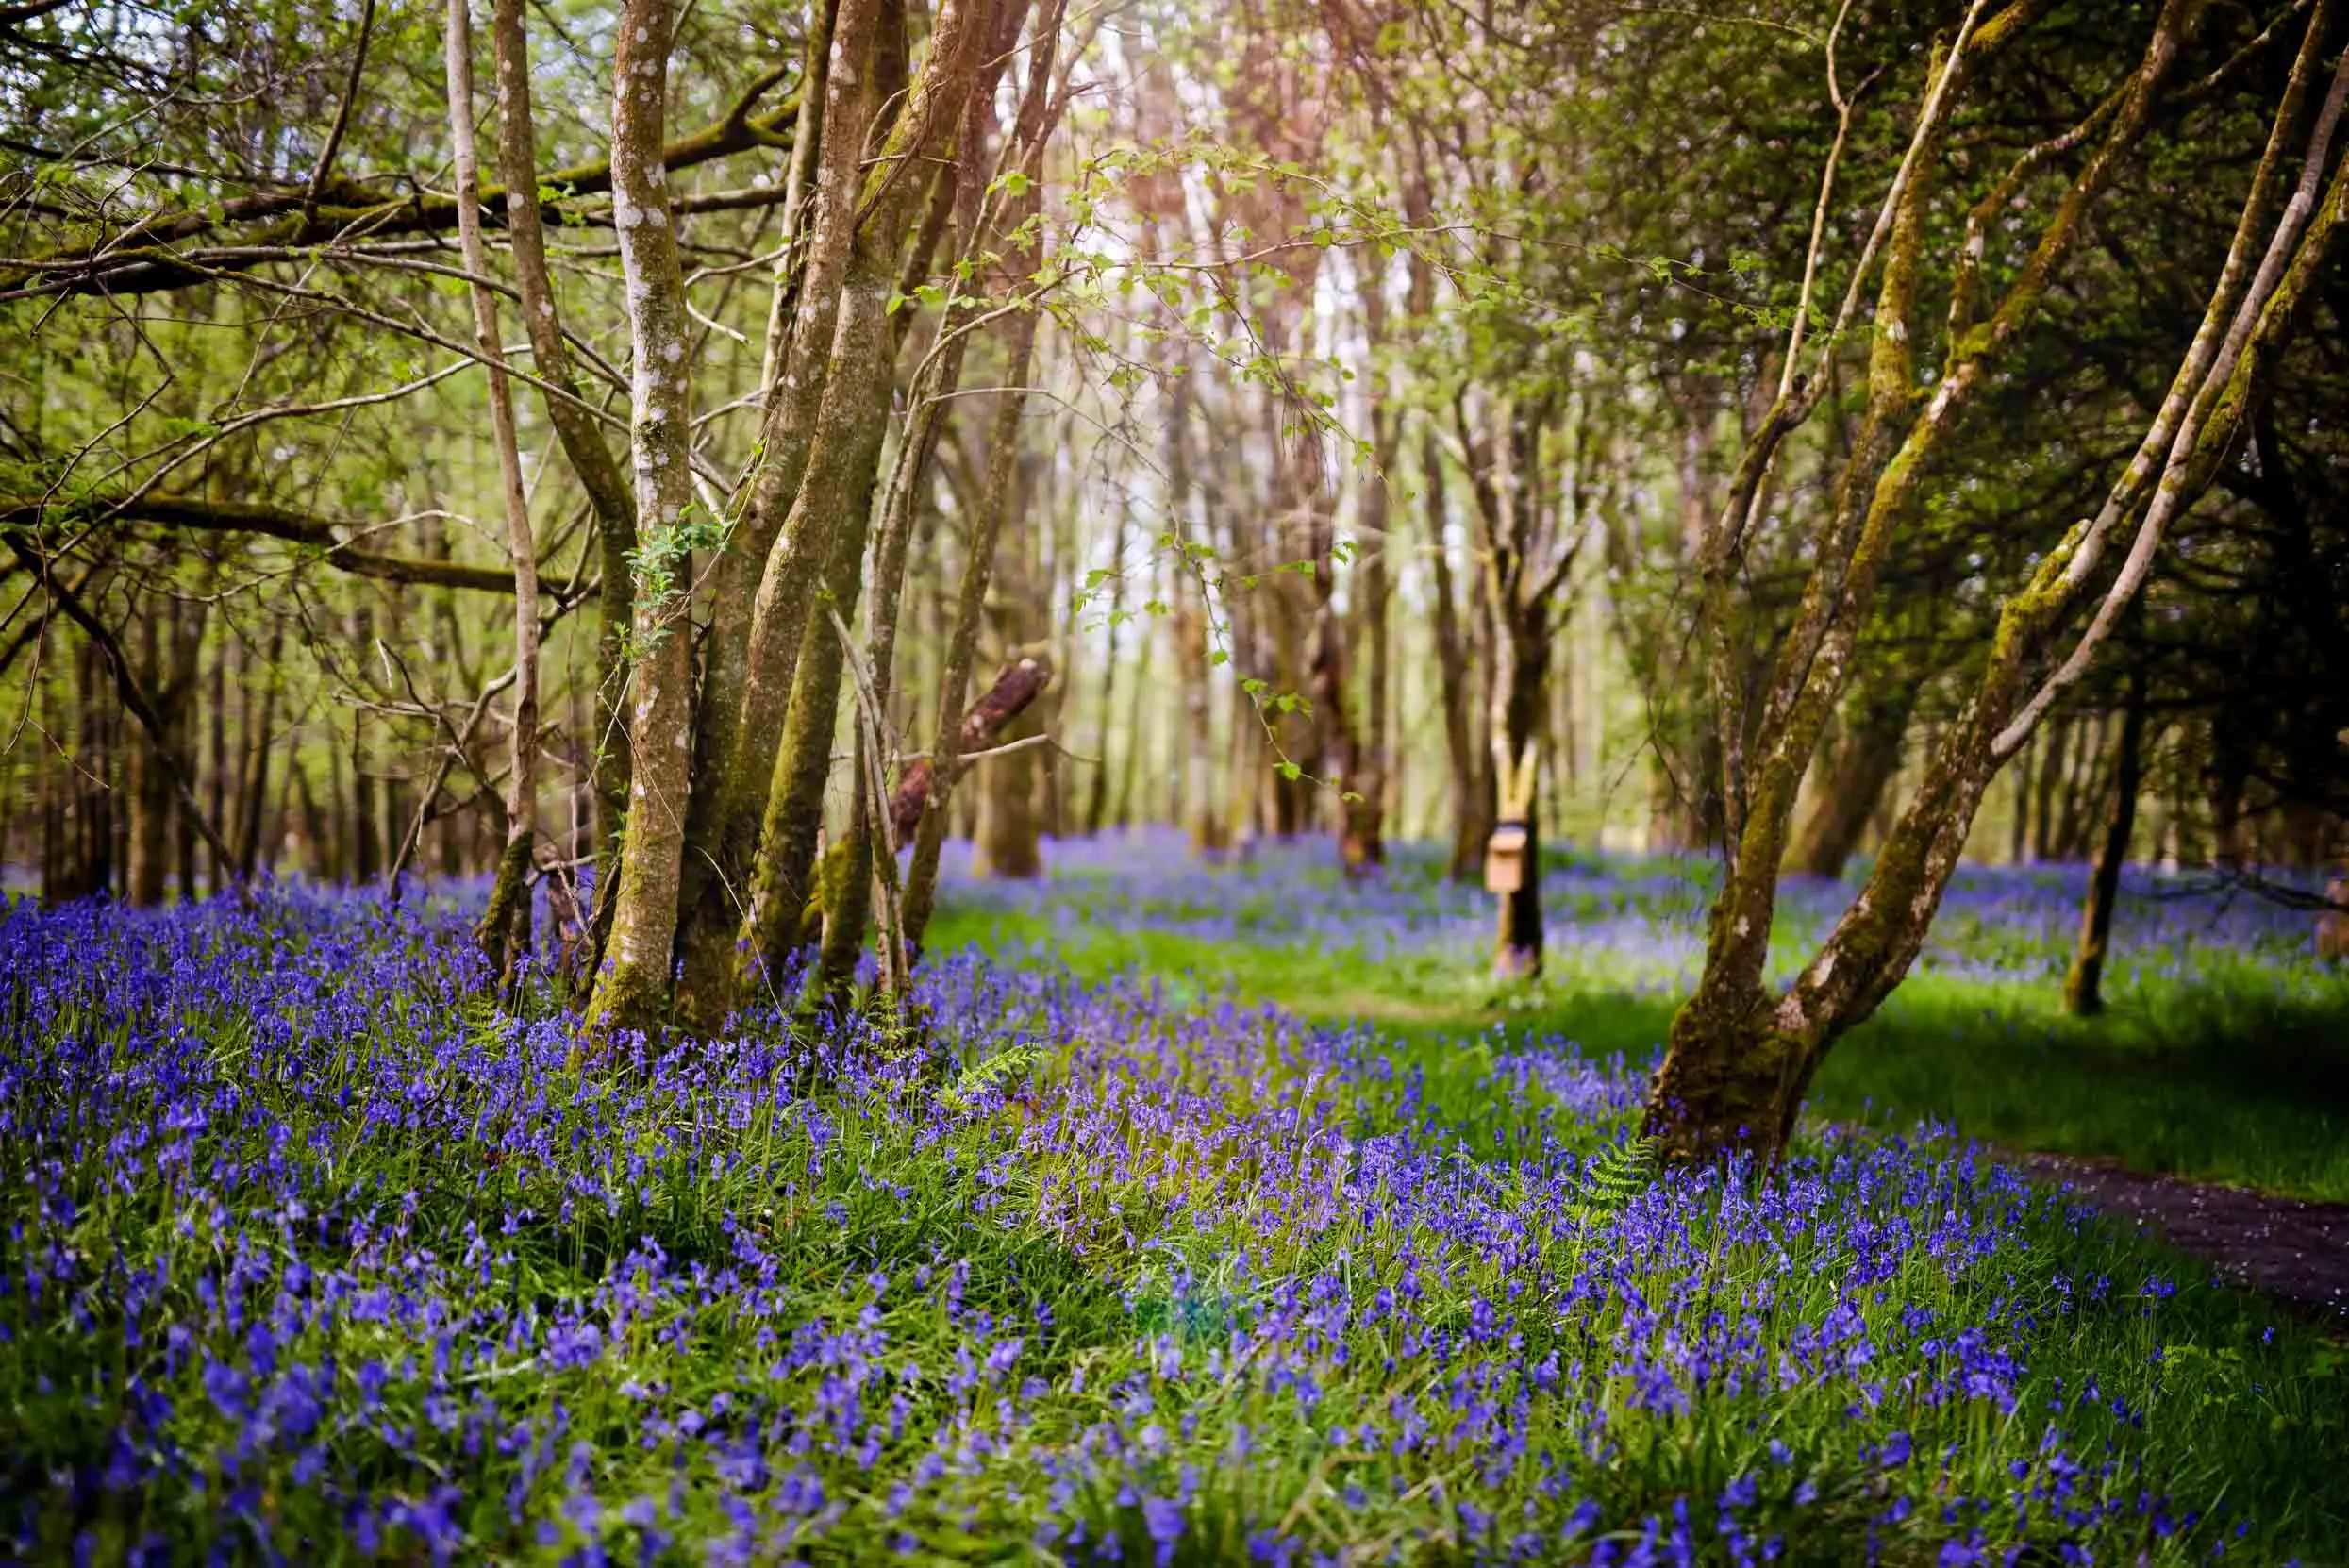 Bluebells cover the woodland floor surrounded by tall trees.